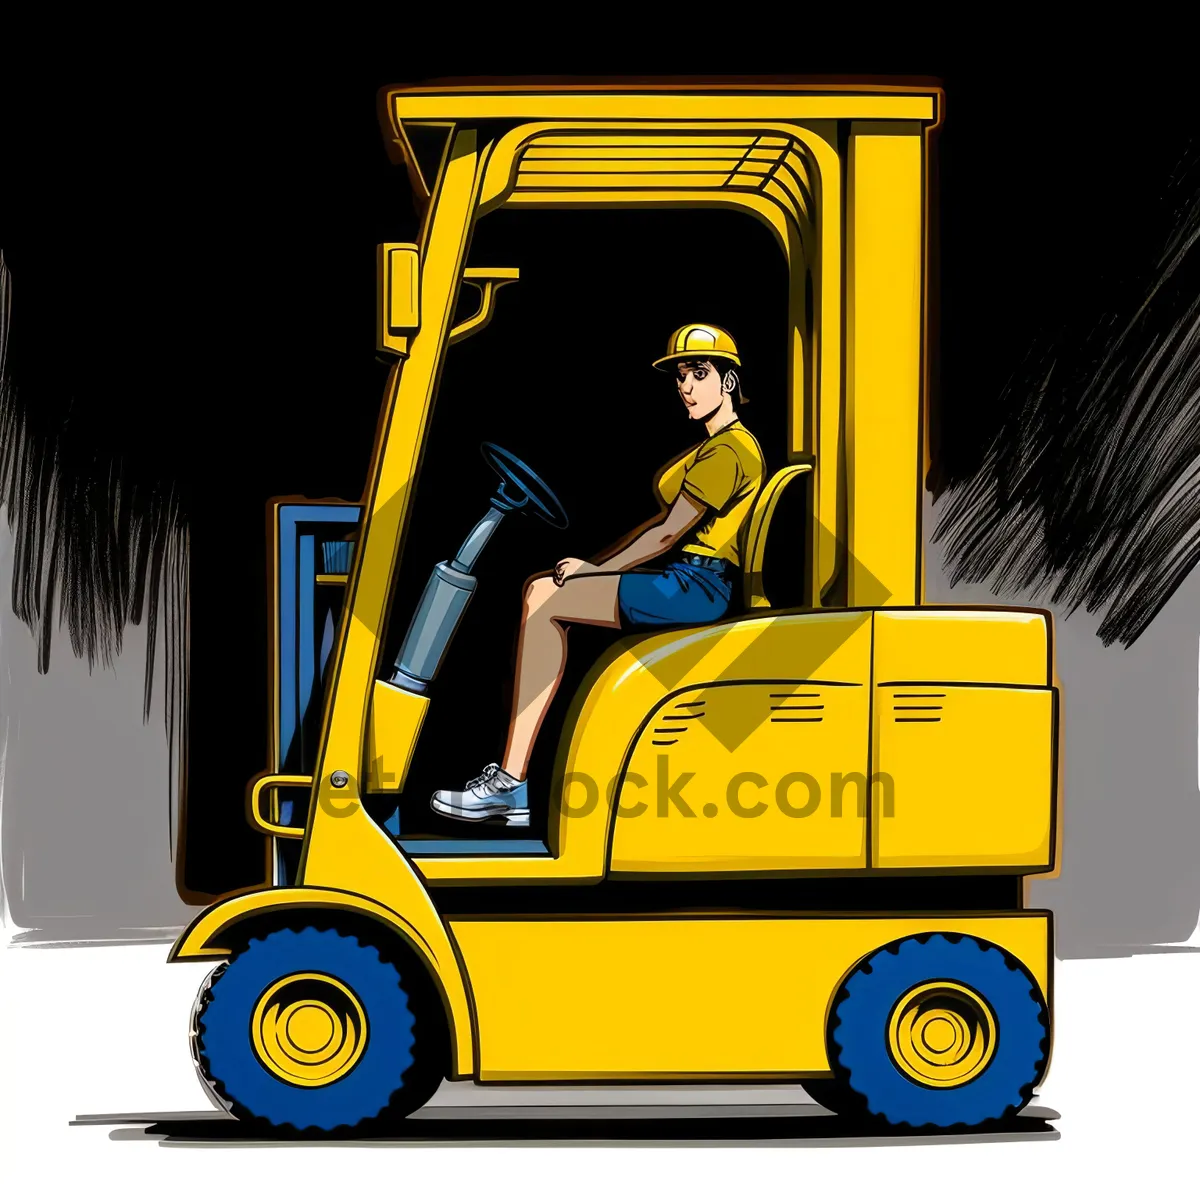 Picture of Industrial Forklift Truck at Work